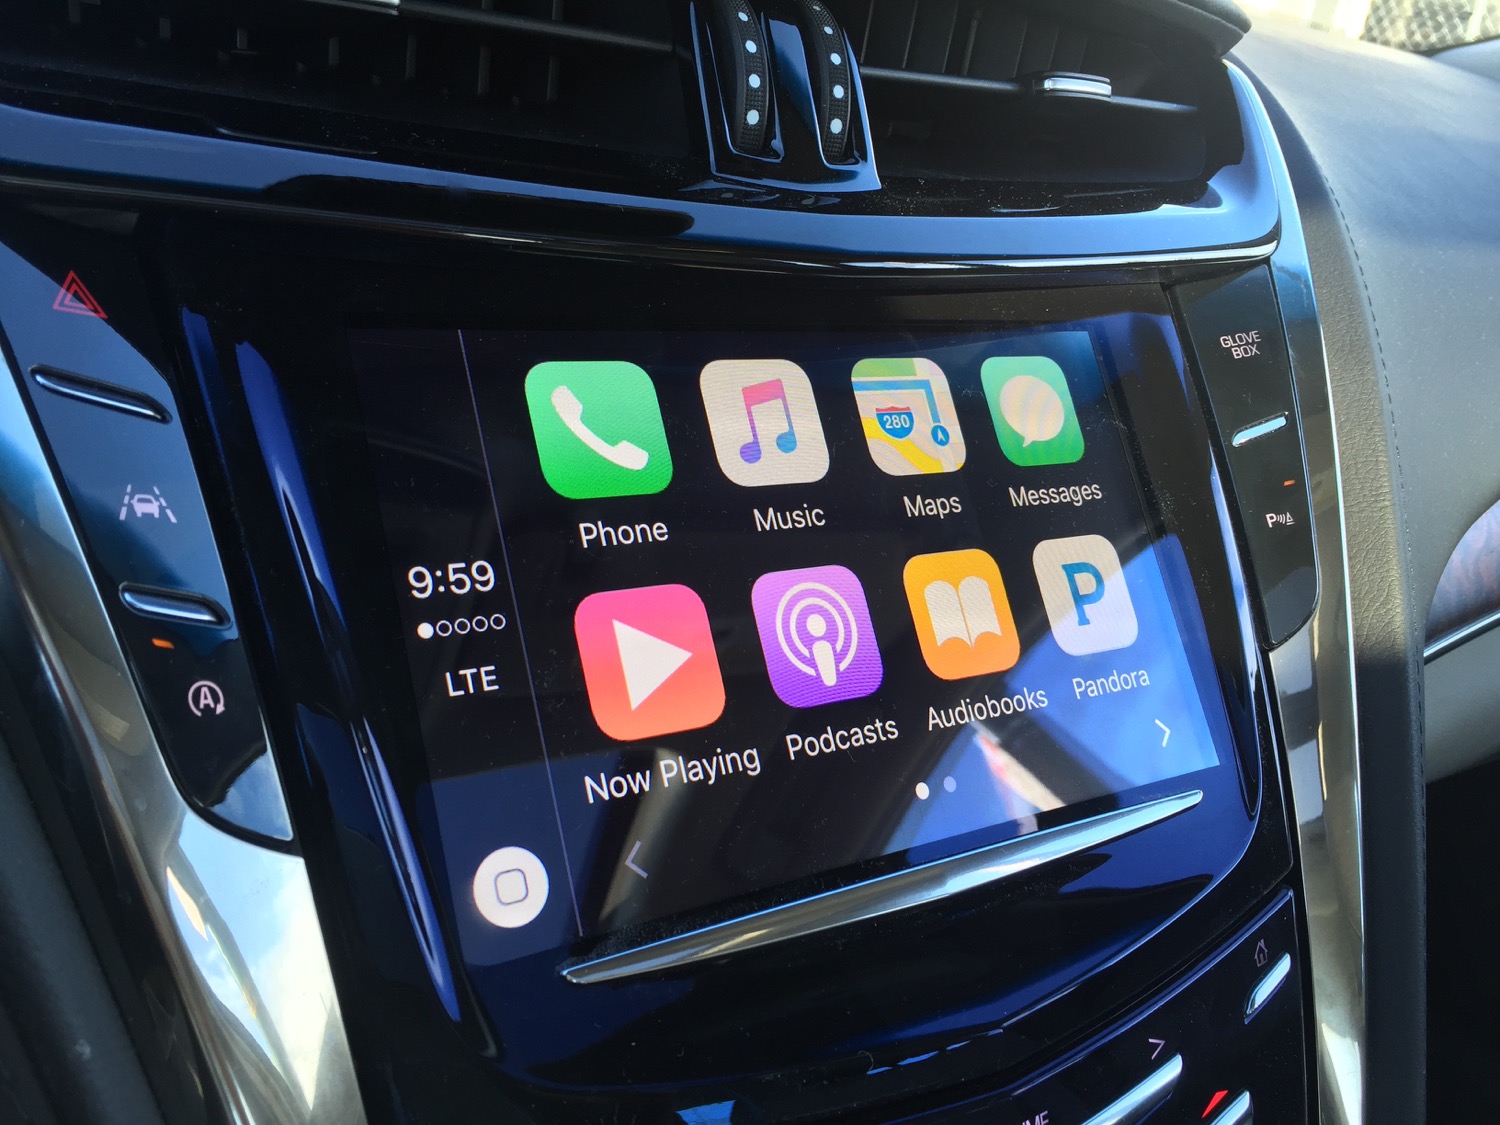 GM ditching Apple CarPlay is about money, not safety